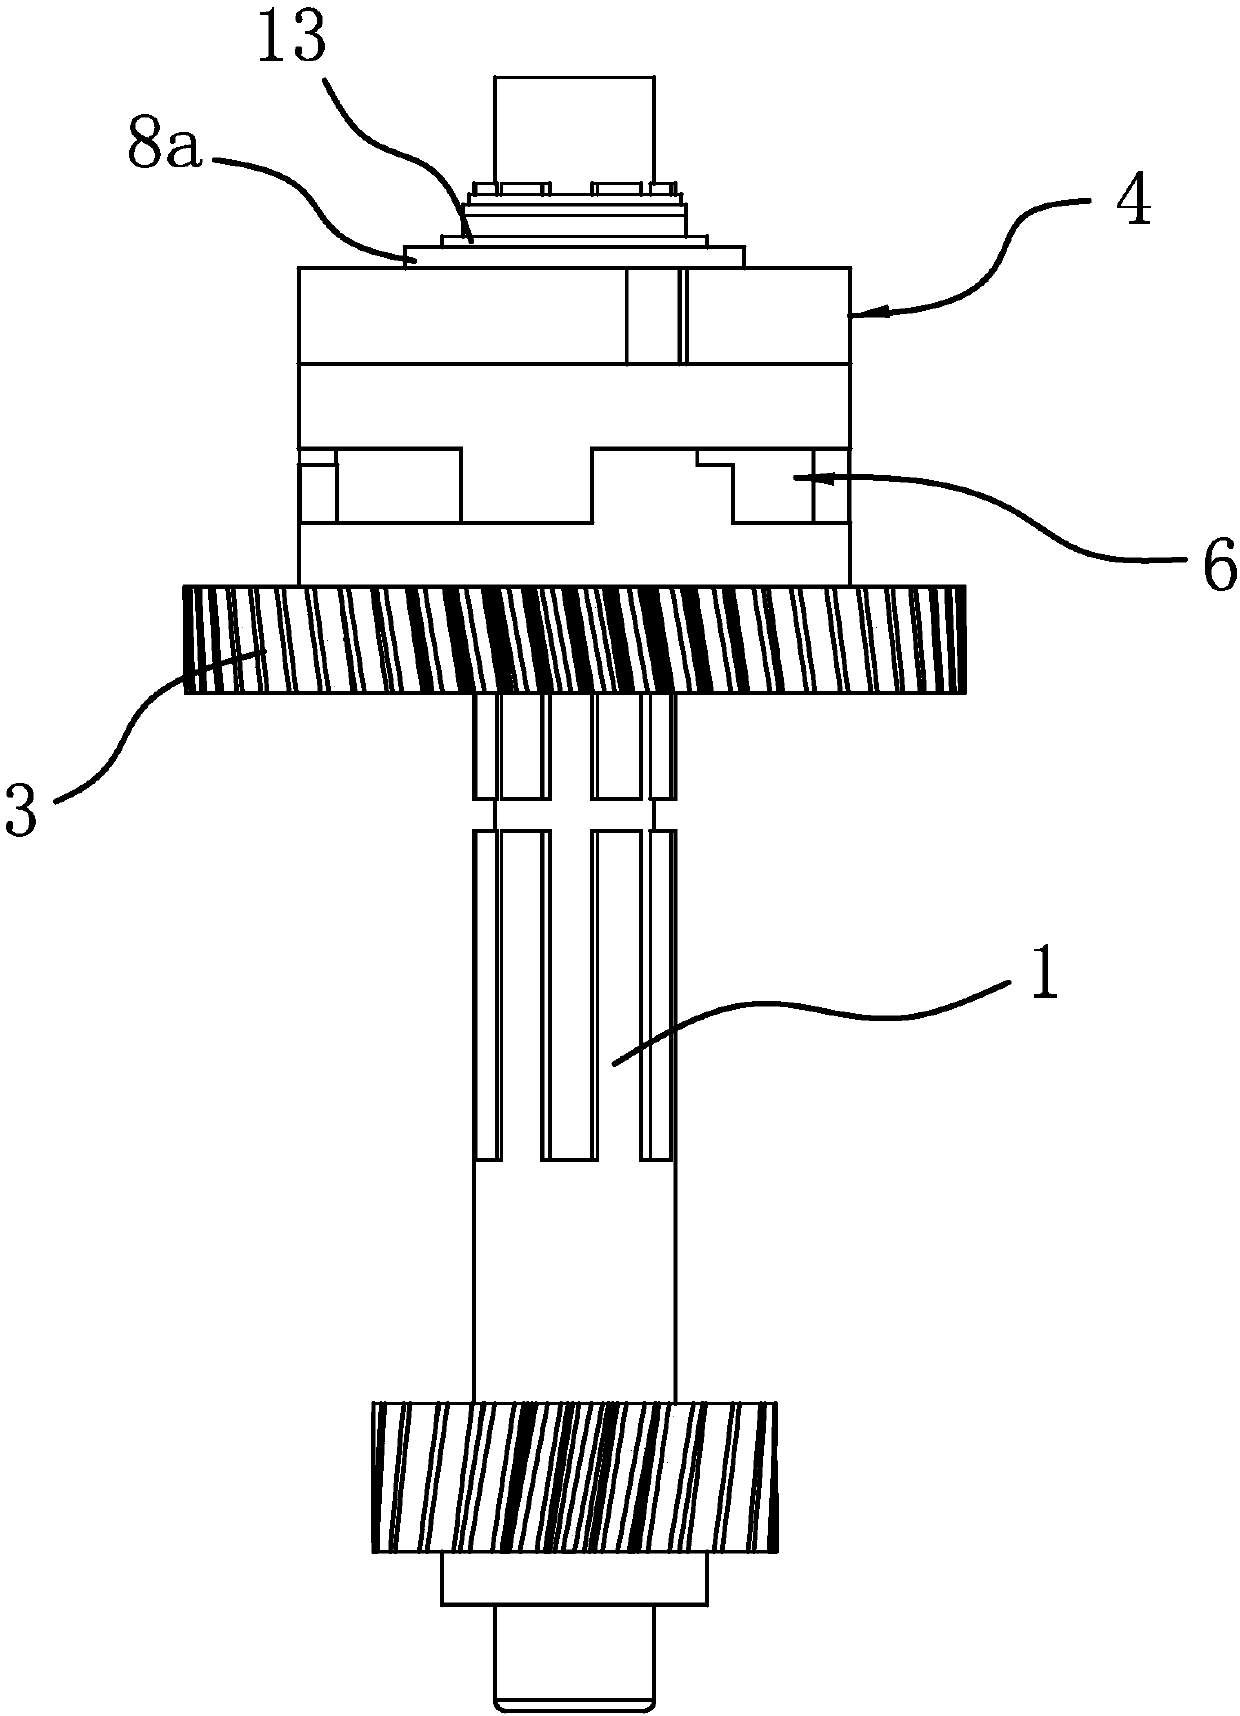 Transmission mechanism of two-way variable-speed motor